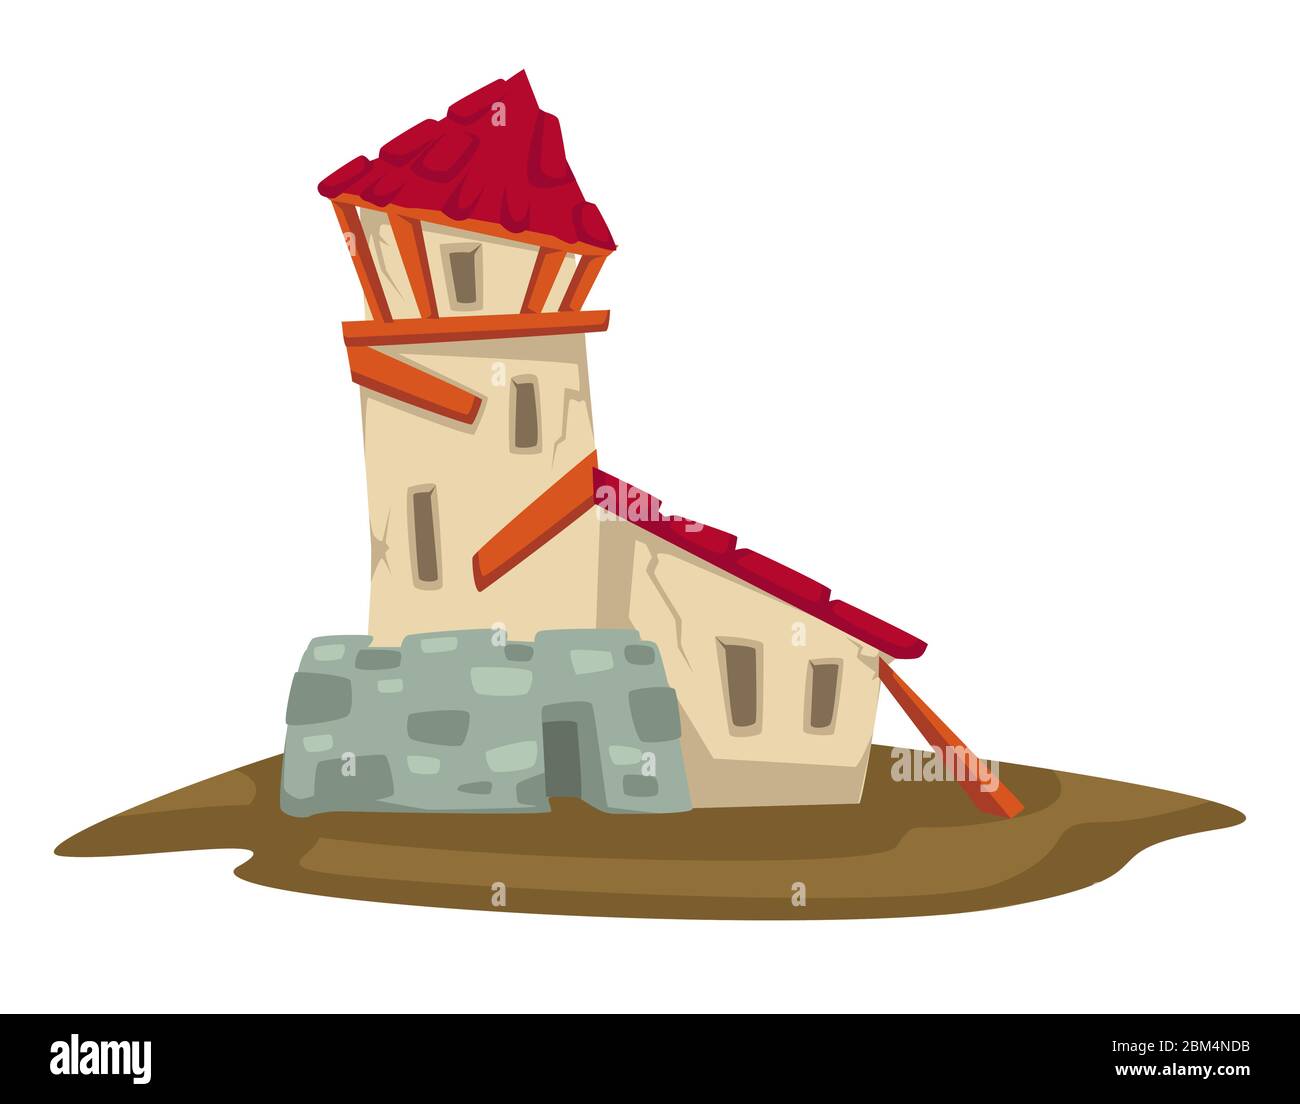 Old house construction, destroyed barn or dwelling vector Stock Vector